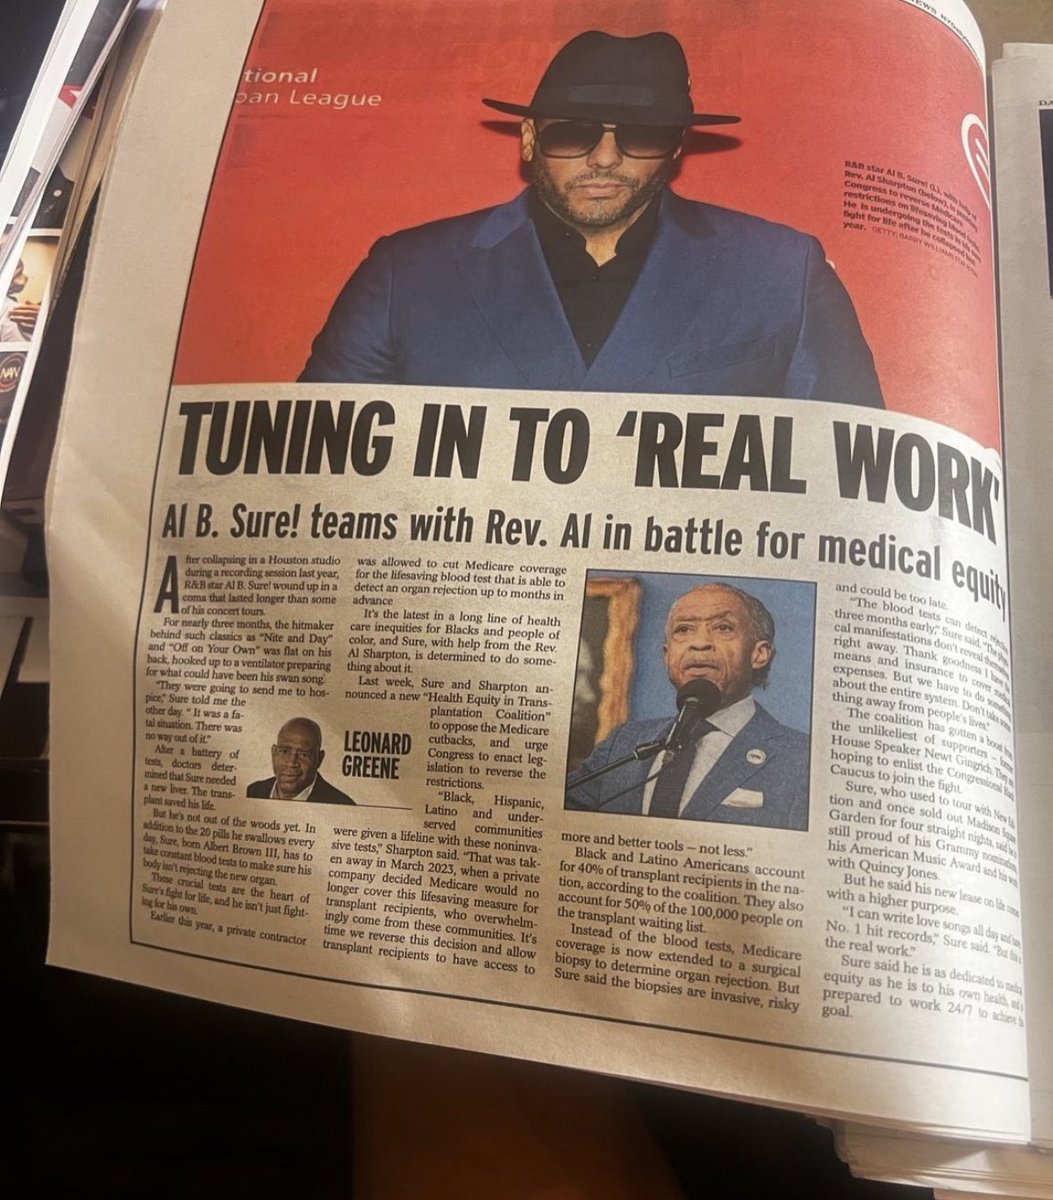 NY Daily News columnist, Leonard Greene did a full page today on a Health Equity Initiative that I’m partnering in w/ R&B great Al B. Sure. Al B, a transplant recipient, has such commitment and passion about this. I’m honored to join him.